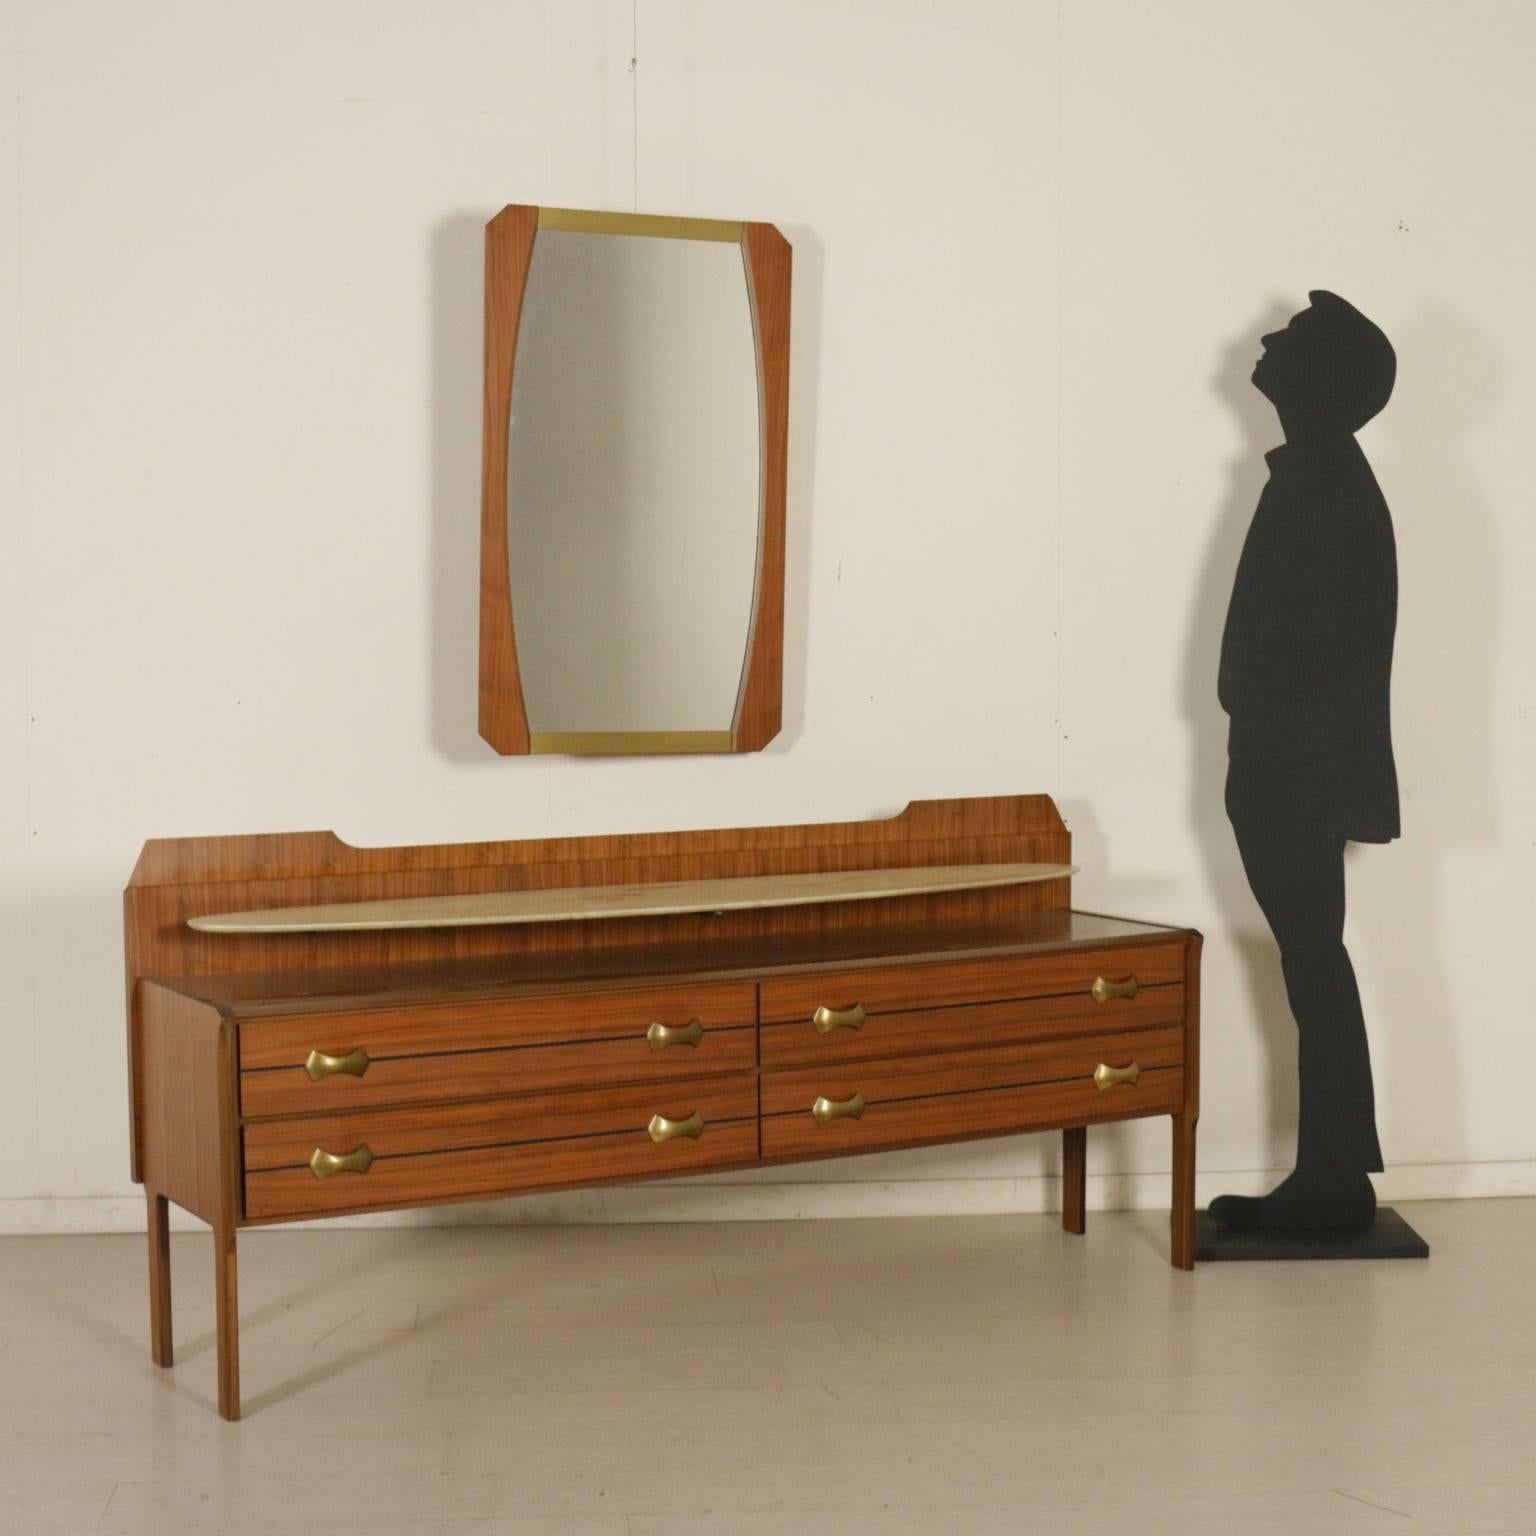 A chest of drawers with mirror, walnut veneer, marble and brass. 
Mirror frame: H 102, W 62, D 3 cm.
Manufactured in Italy, 1960s.